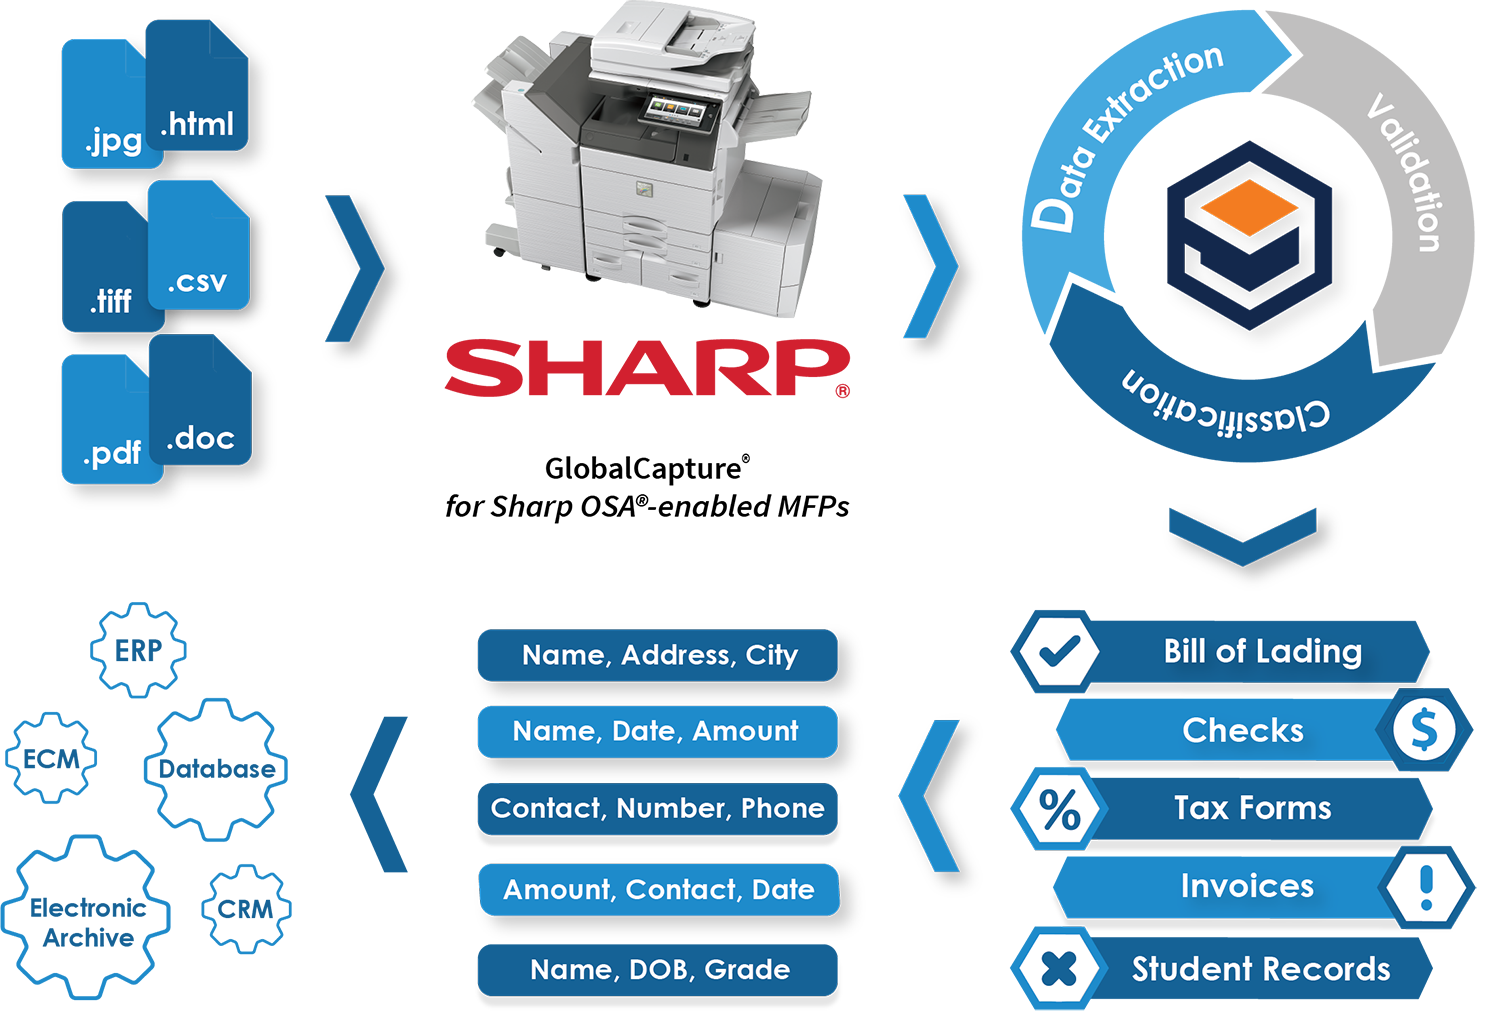 Global Capture for Sharp OSA-enabled MFPs captures data from scanned files, converts it into text searchable PDFs, and sends to an ERP, Database, Electronic Archive or CRM system.